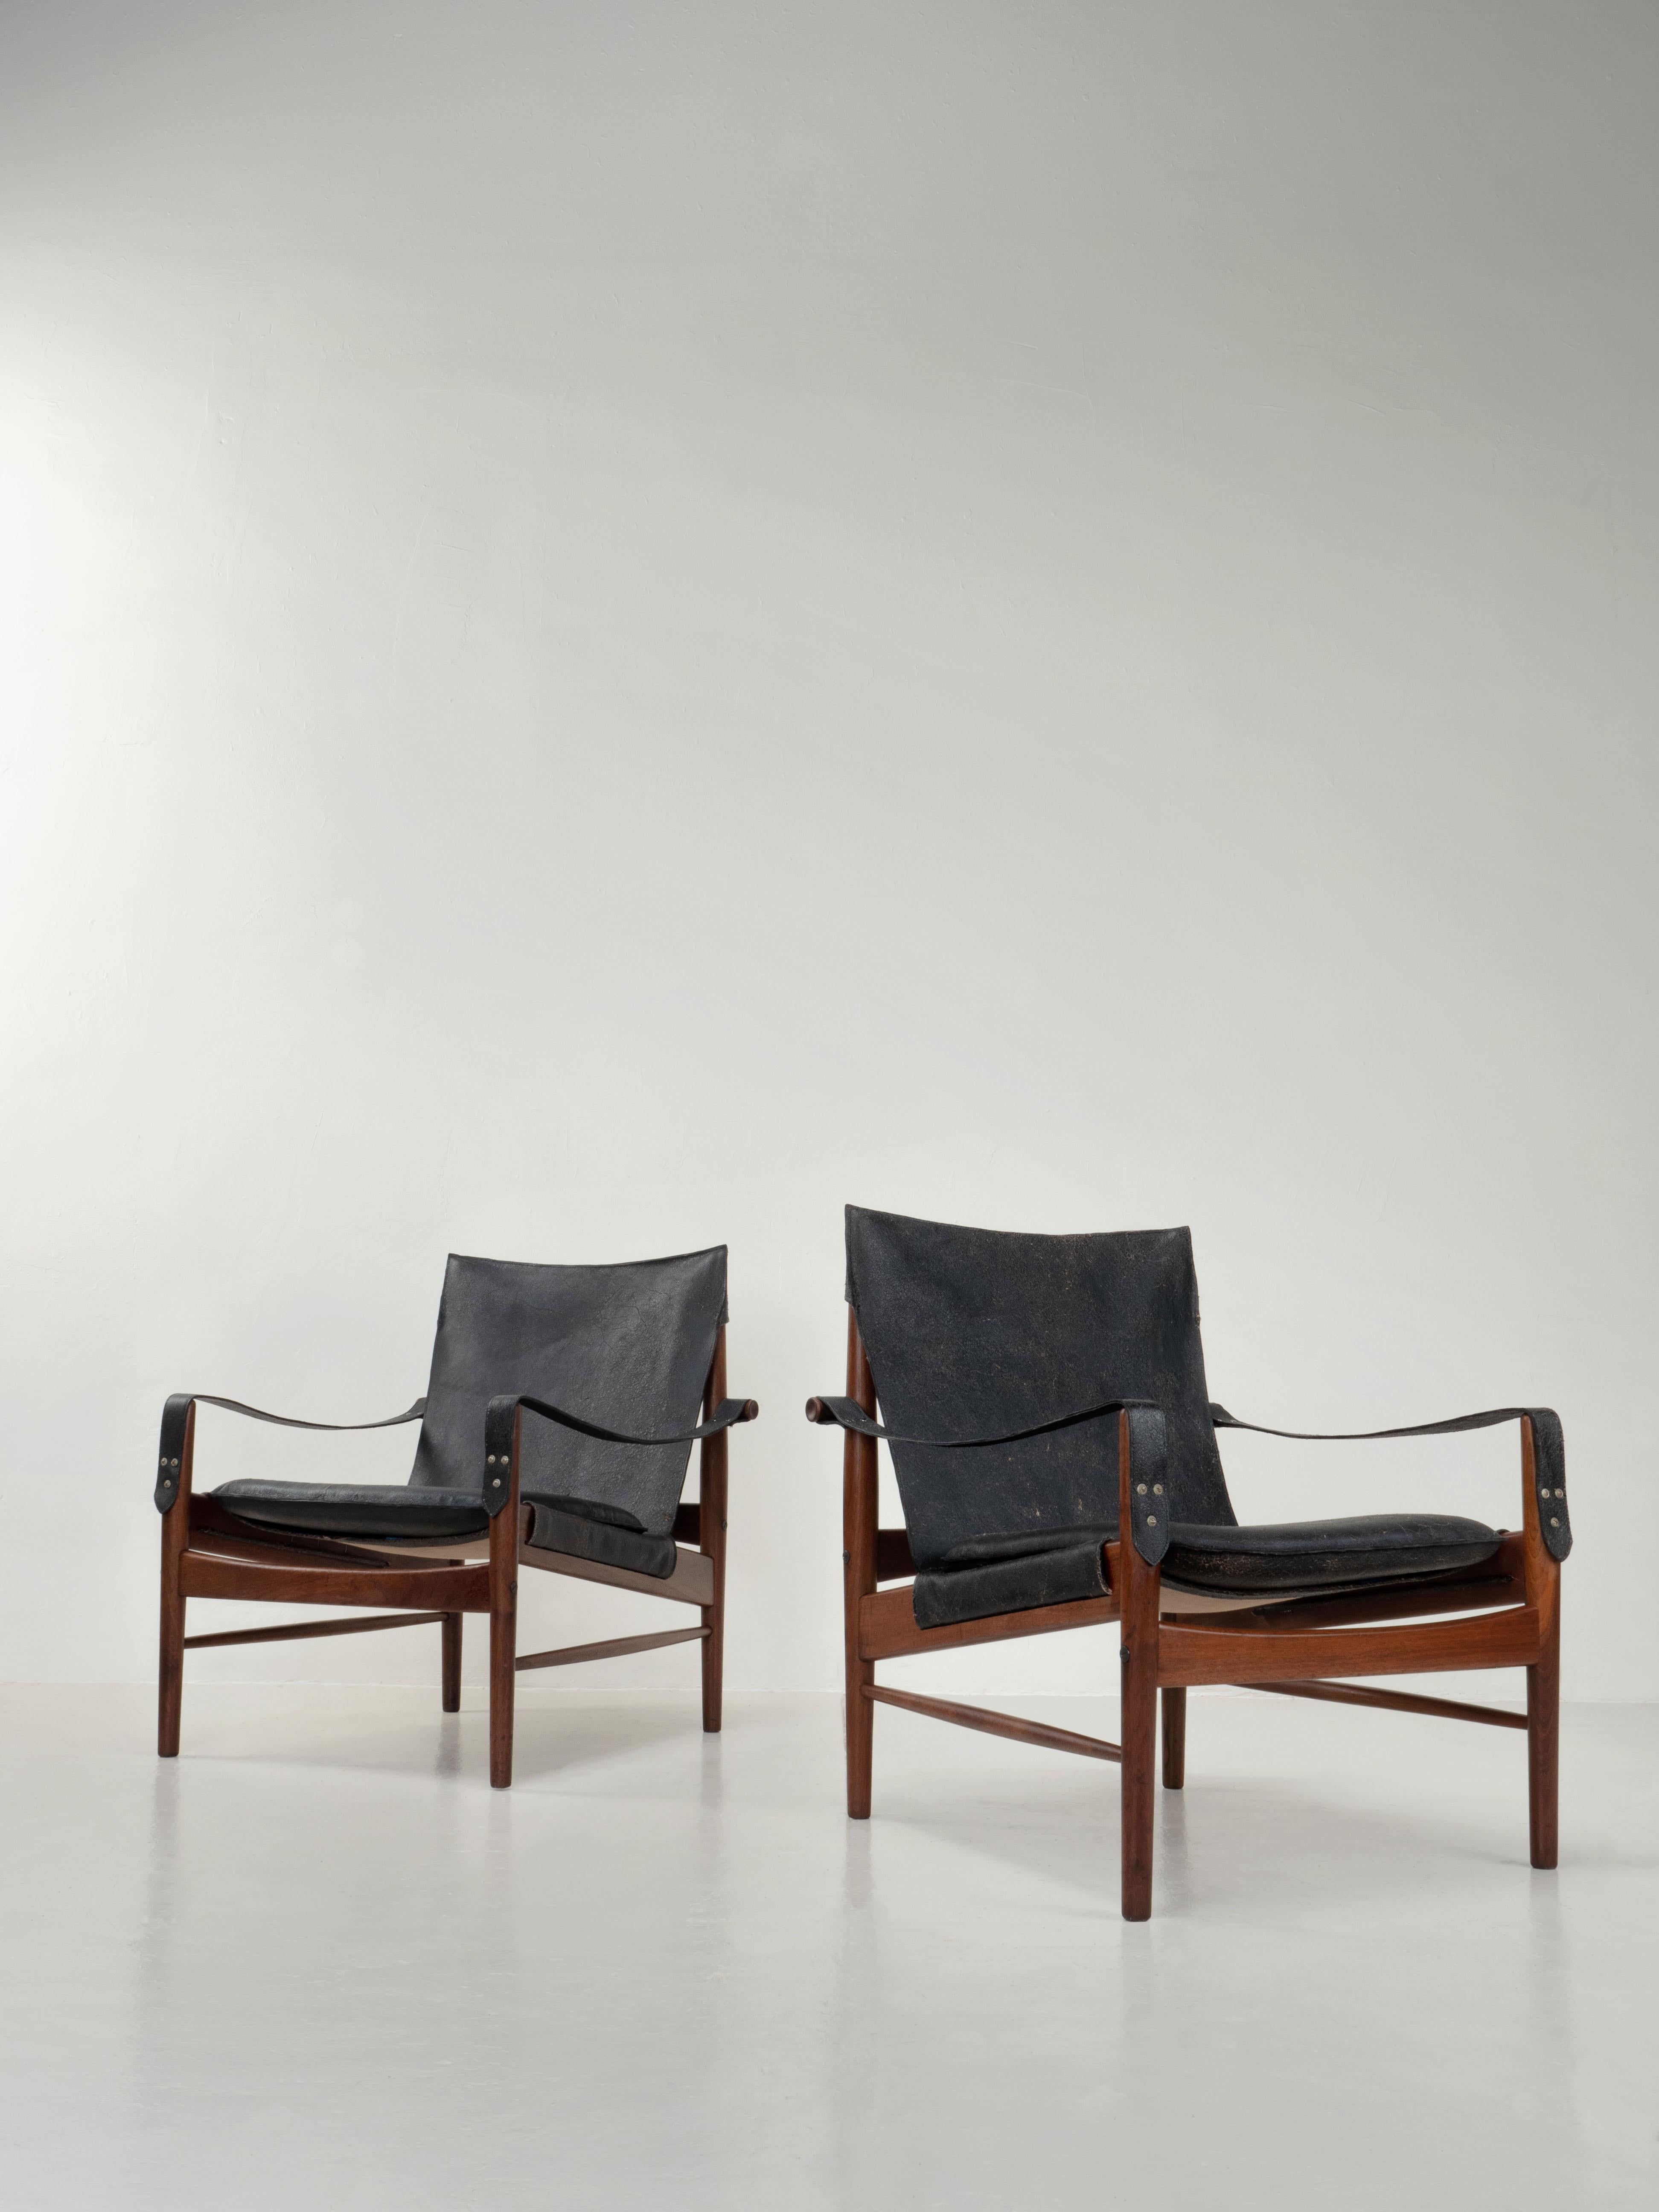 Hans Olsen designed Safari chairs. Viska Mobler, Sweden 1960's.

Stunning chairs in solid walnut. Wood frames has been refinished and oiled, some normal wear and patina to the wood remains. New foam and new black belted leather slings. We chose a